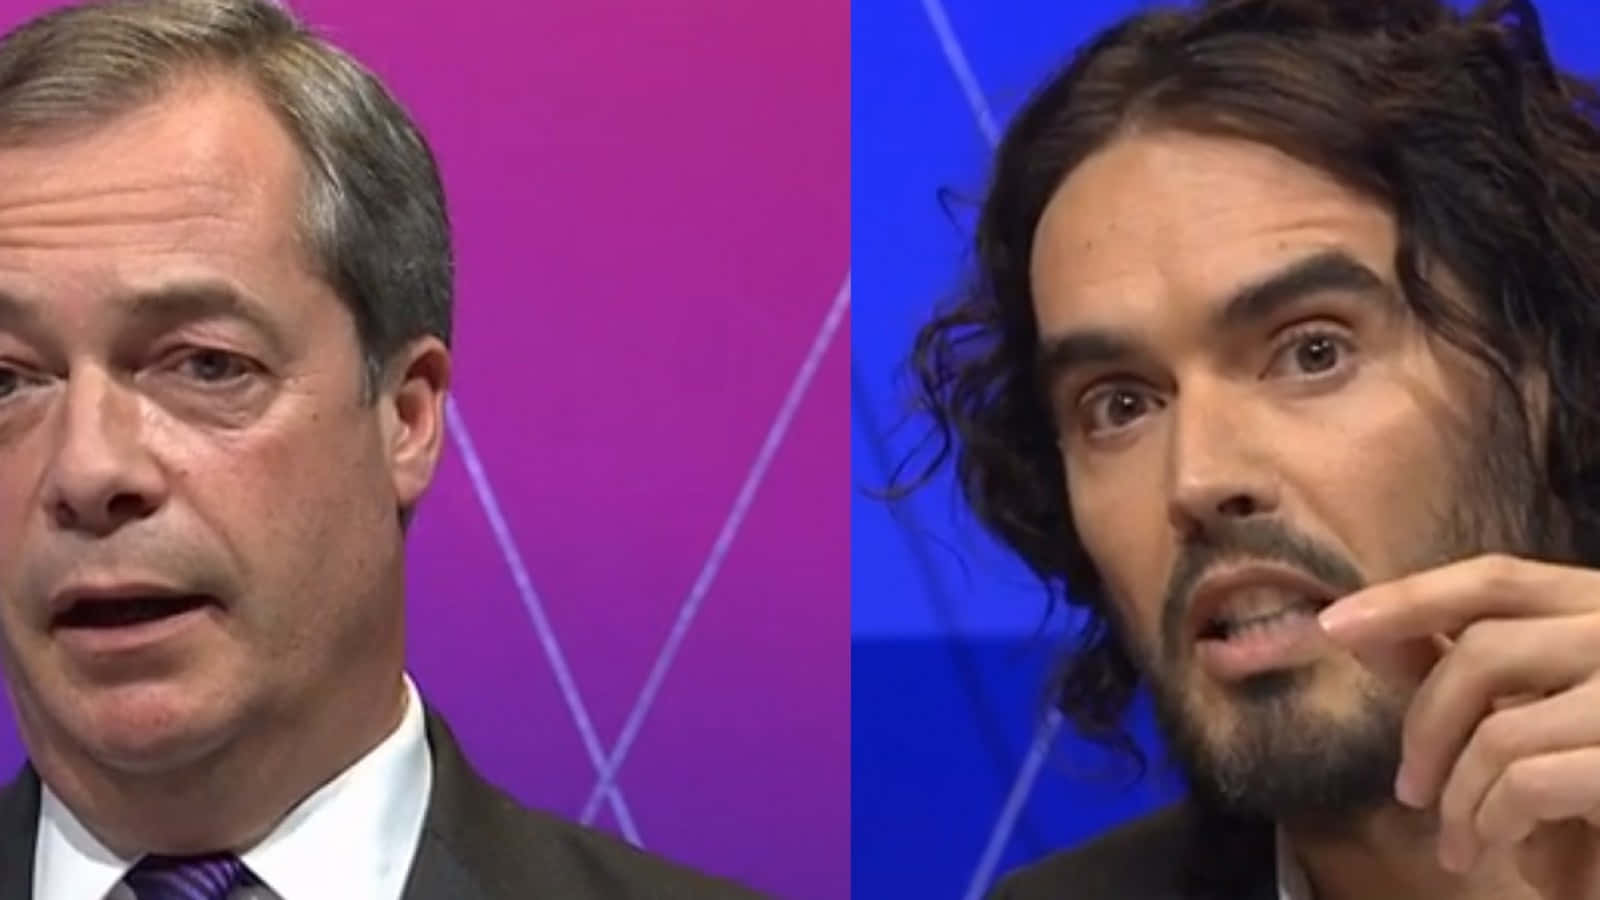 Russell Brand With Nigel Farage Wallpaper